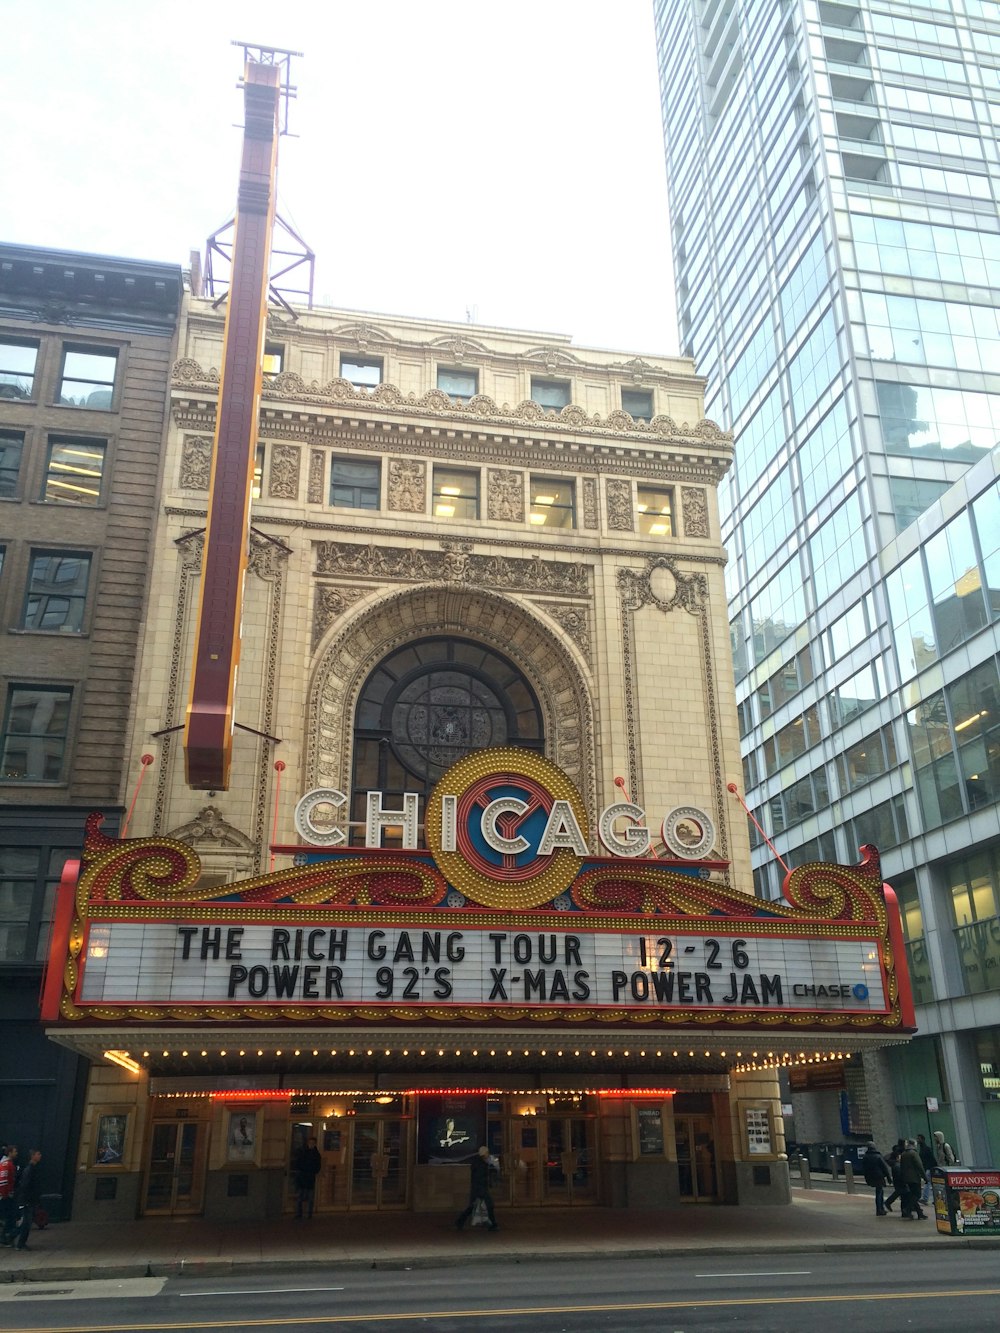 Chicago The Rich Gang Tour building